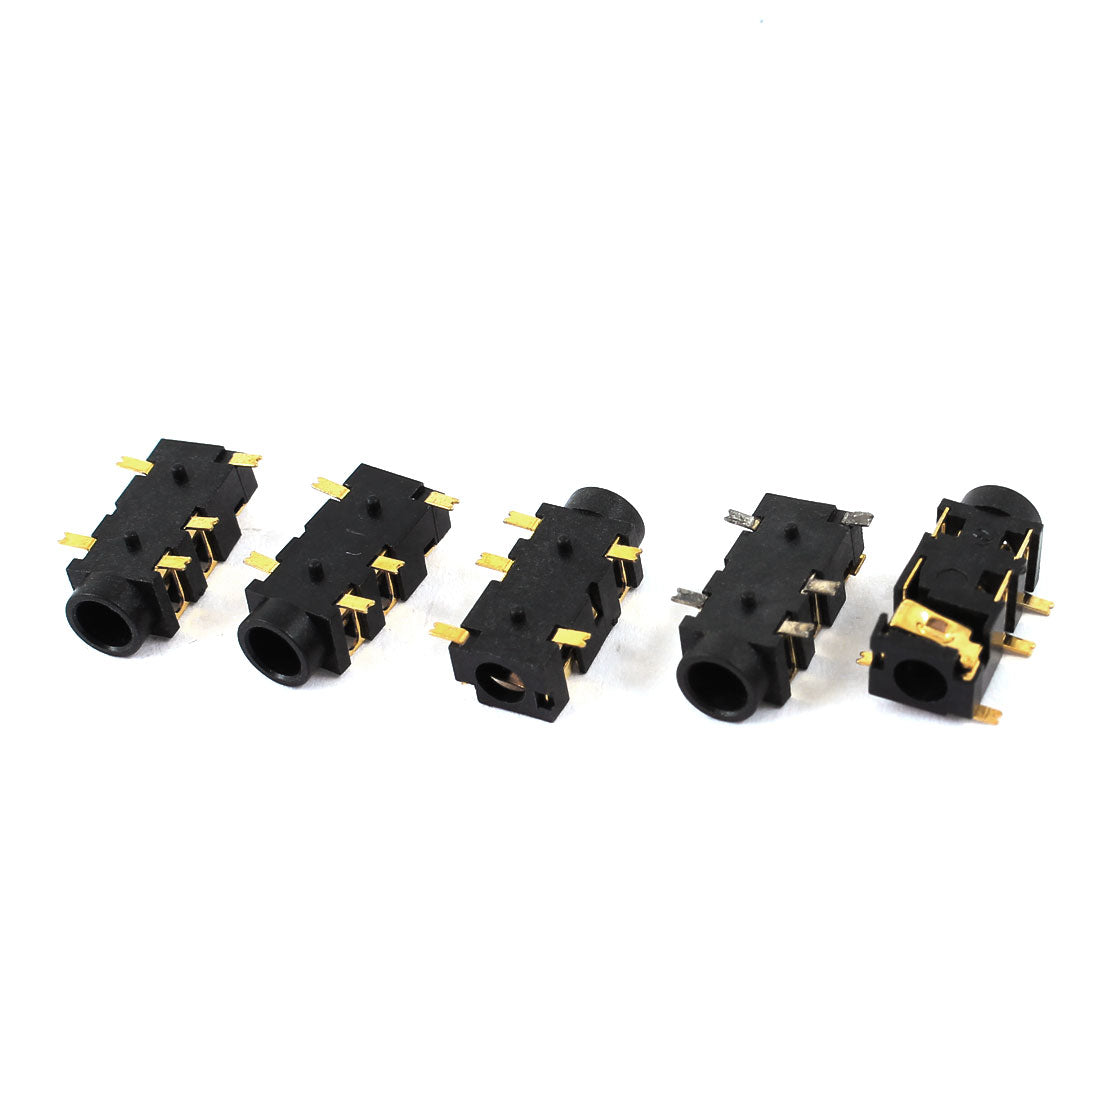 uxcell Uxcell 5pcs 3.5mm Female 5-Pin SMT Surface Mounted Devices PCB Headphone Earphone Stereo Jack Sockets Connectors Black